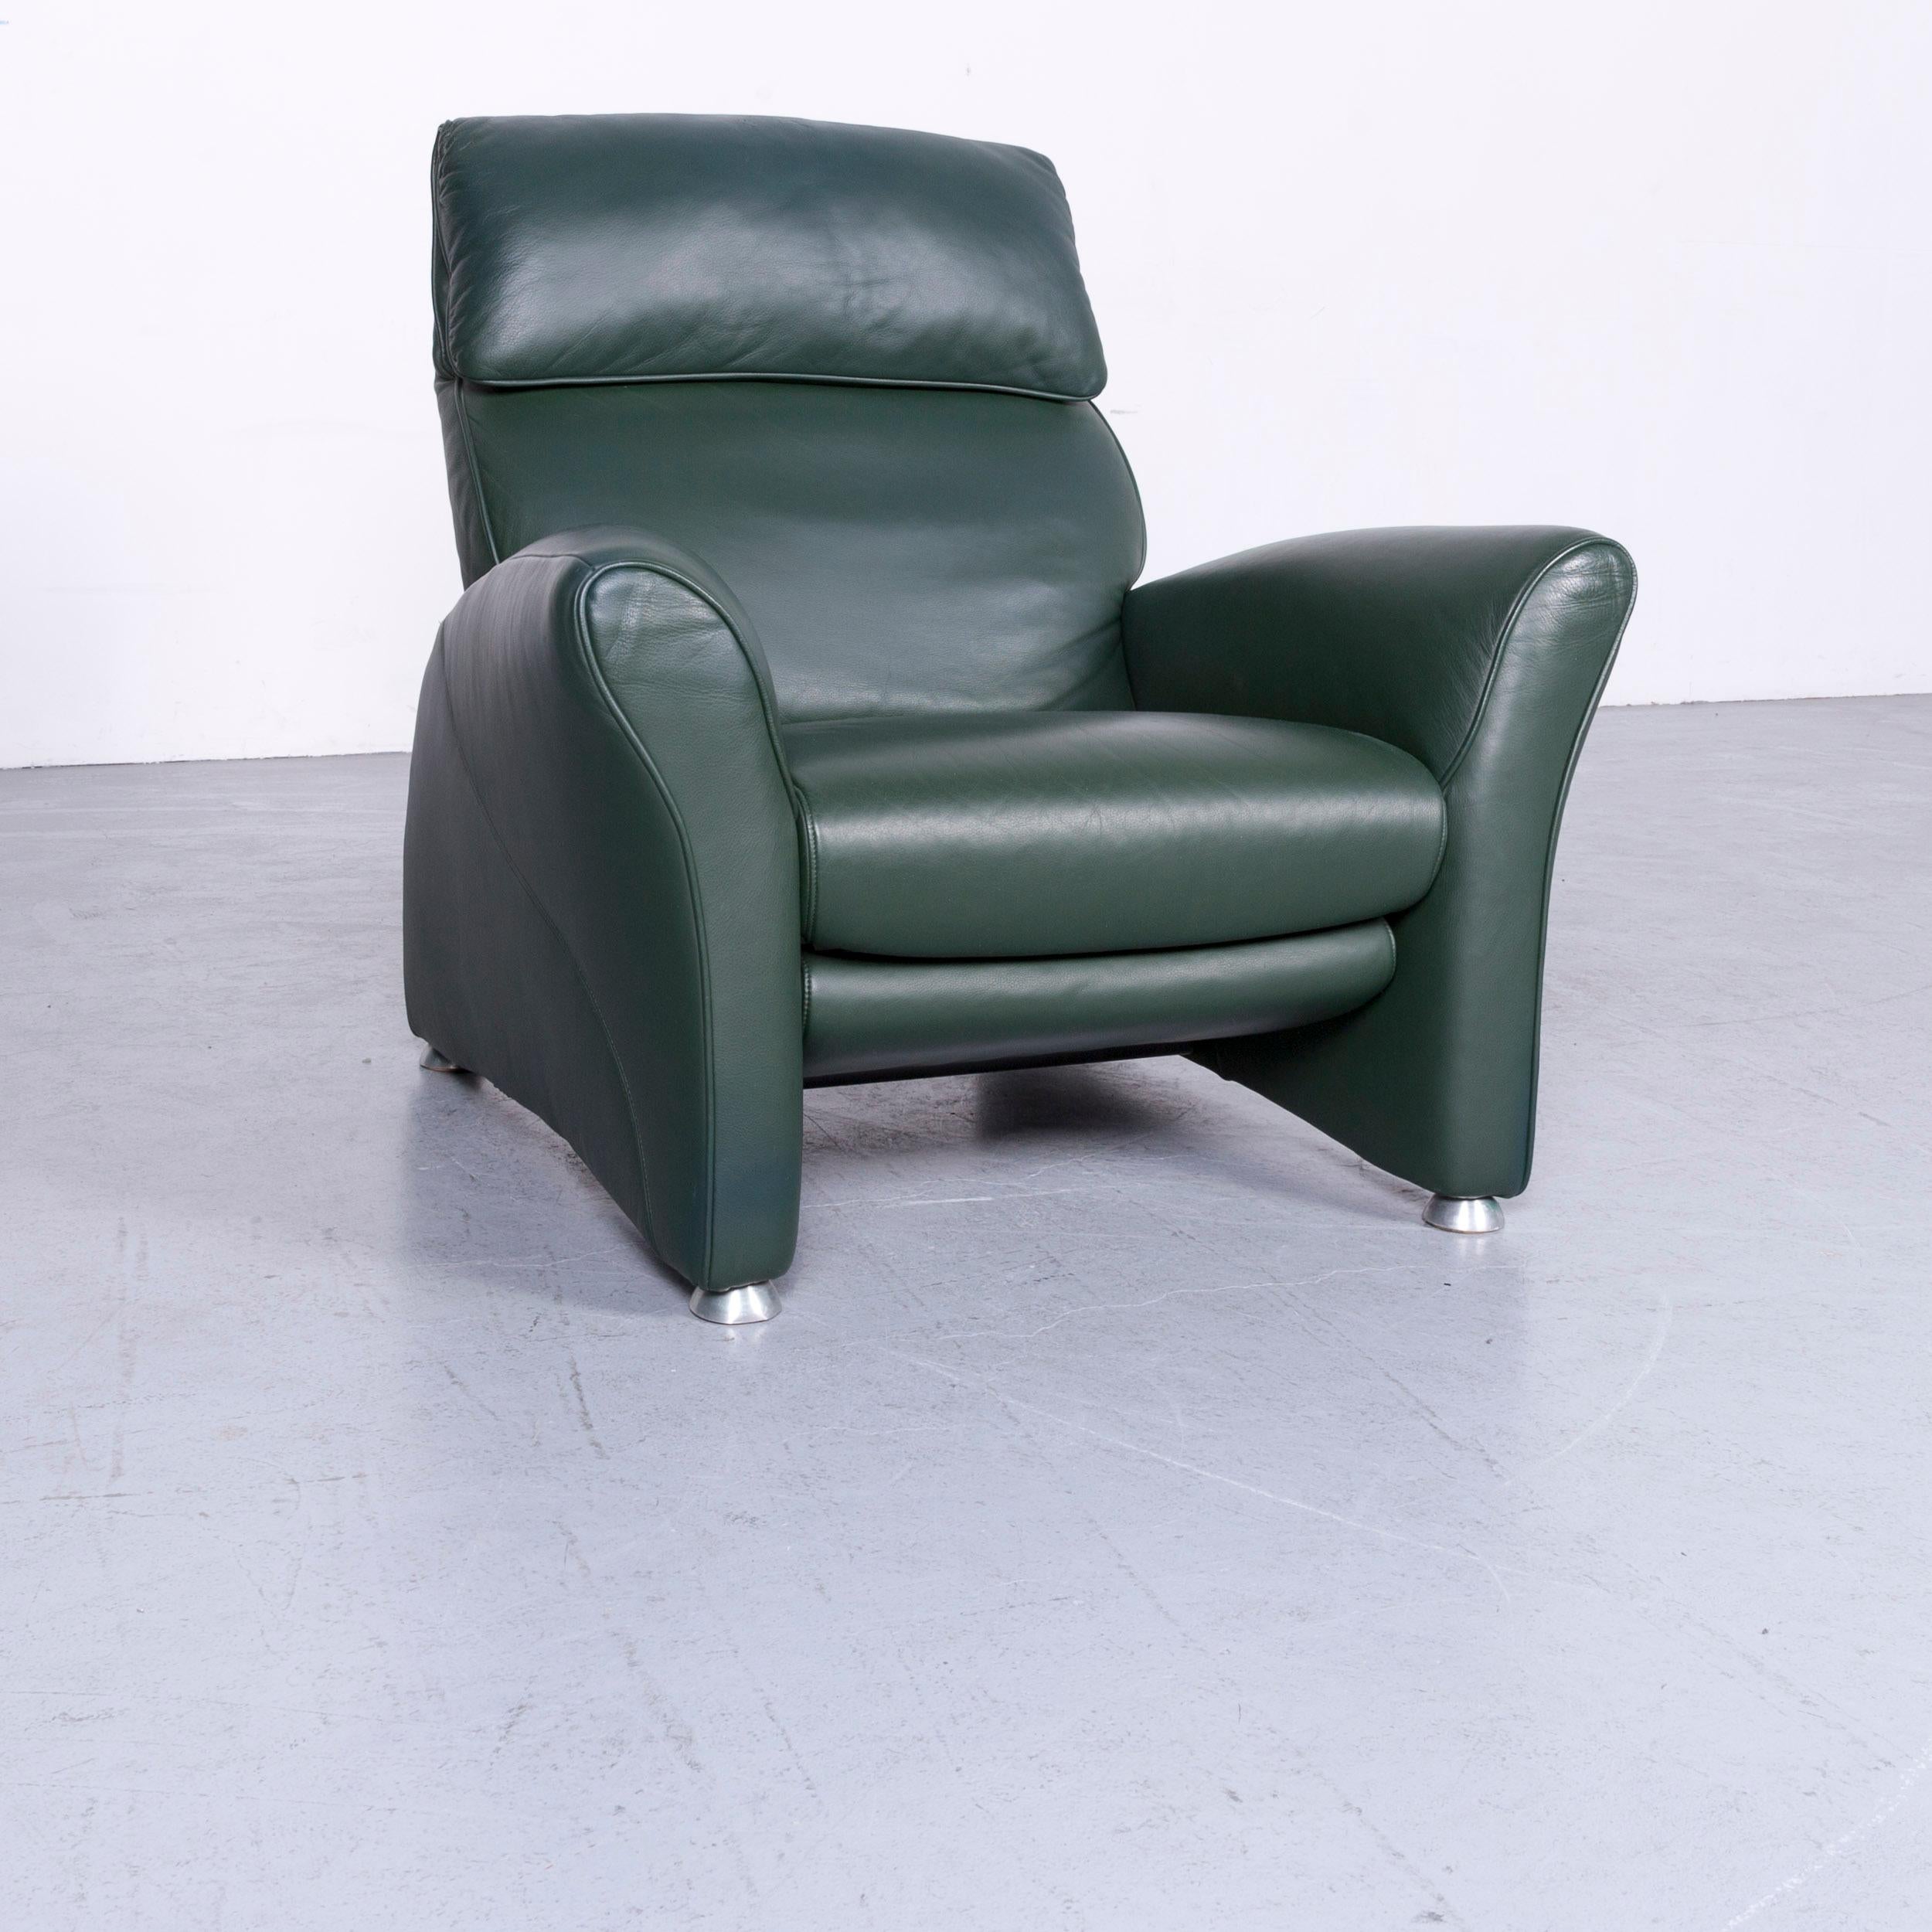 We bring to you a Musterring designer leather argchair oreen one-seat chair.
































